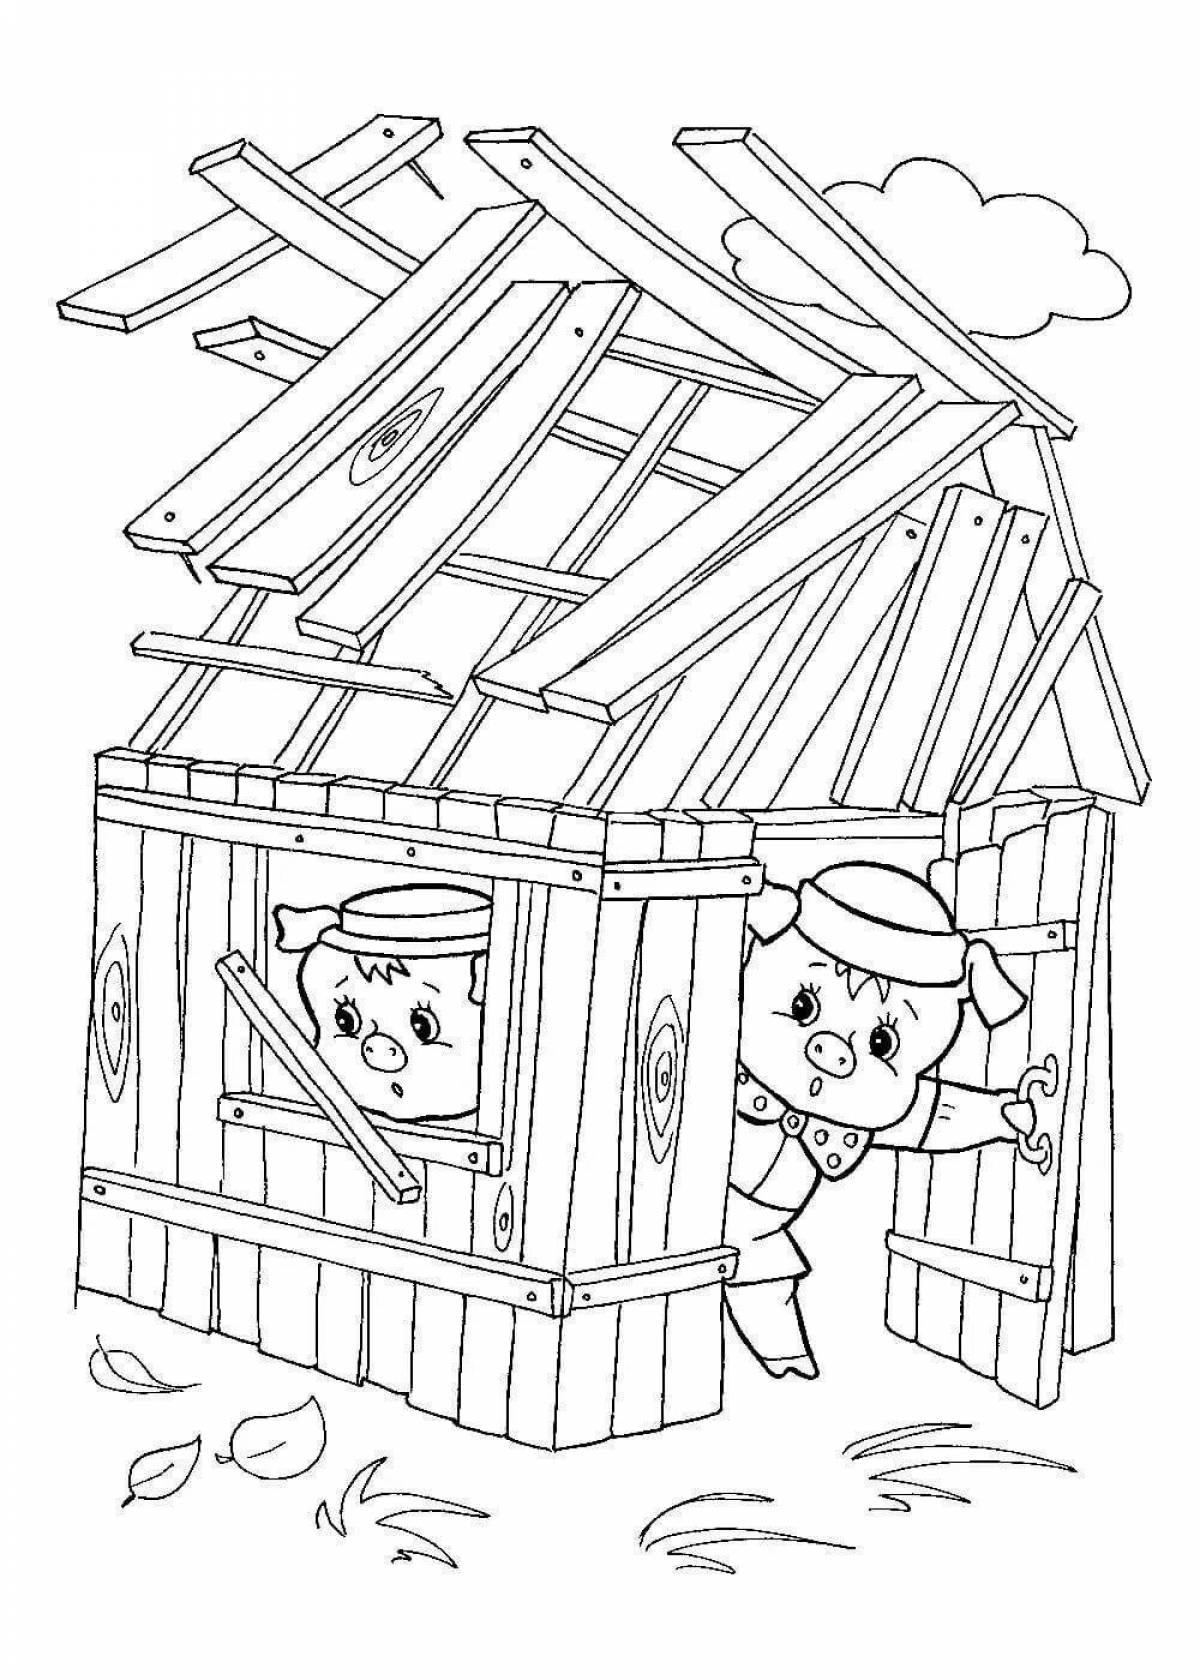 Adorable three little pigs with houses